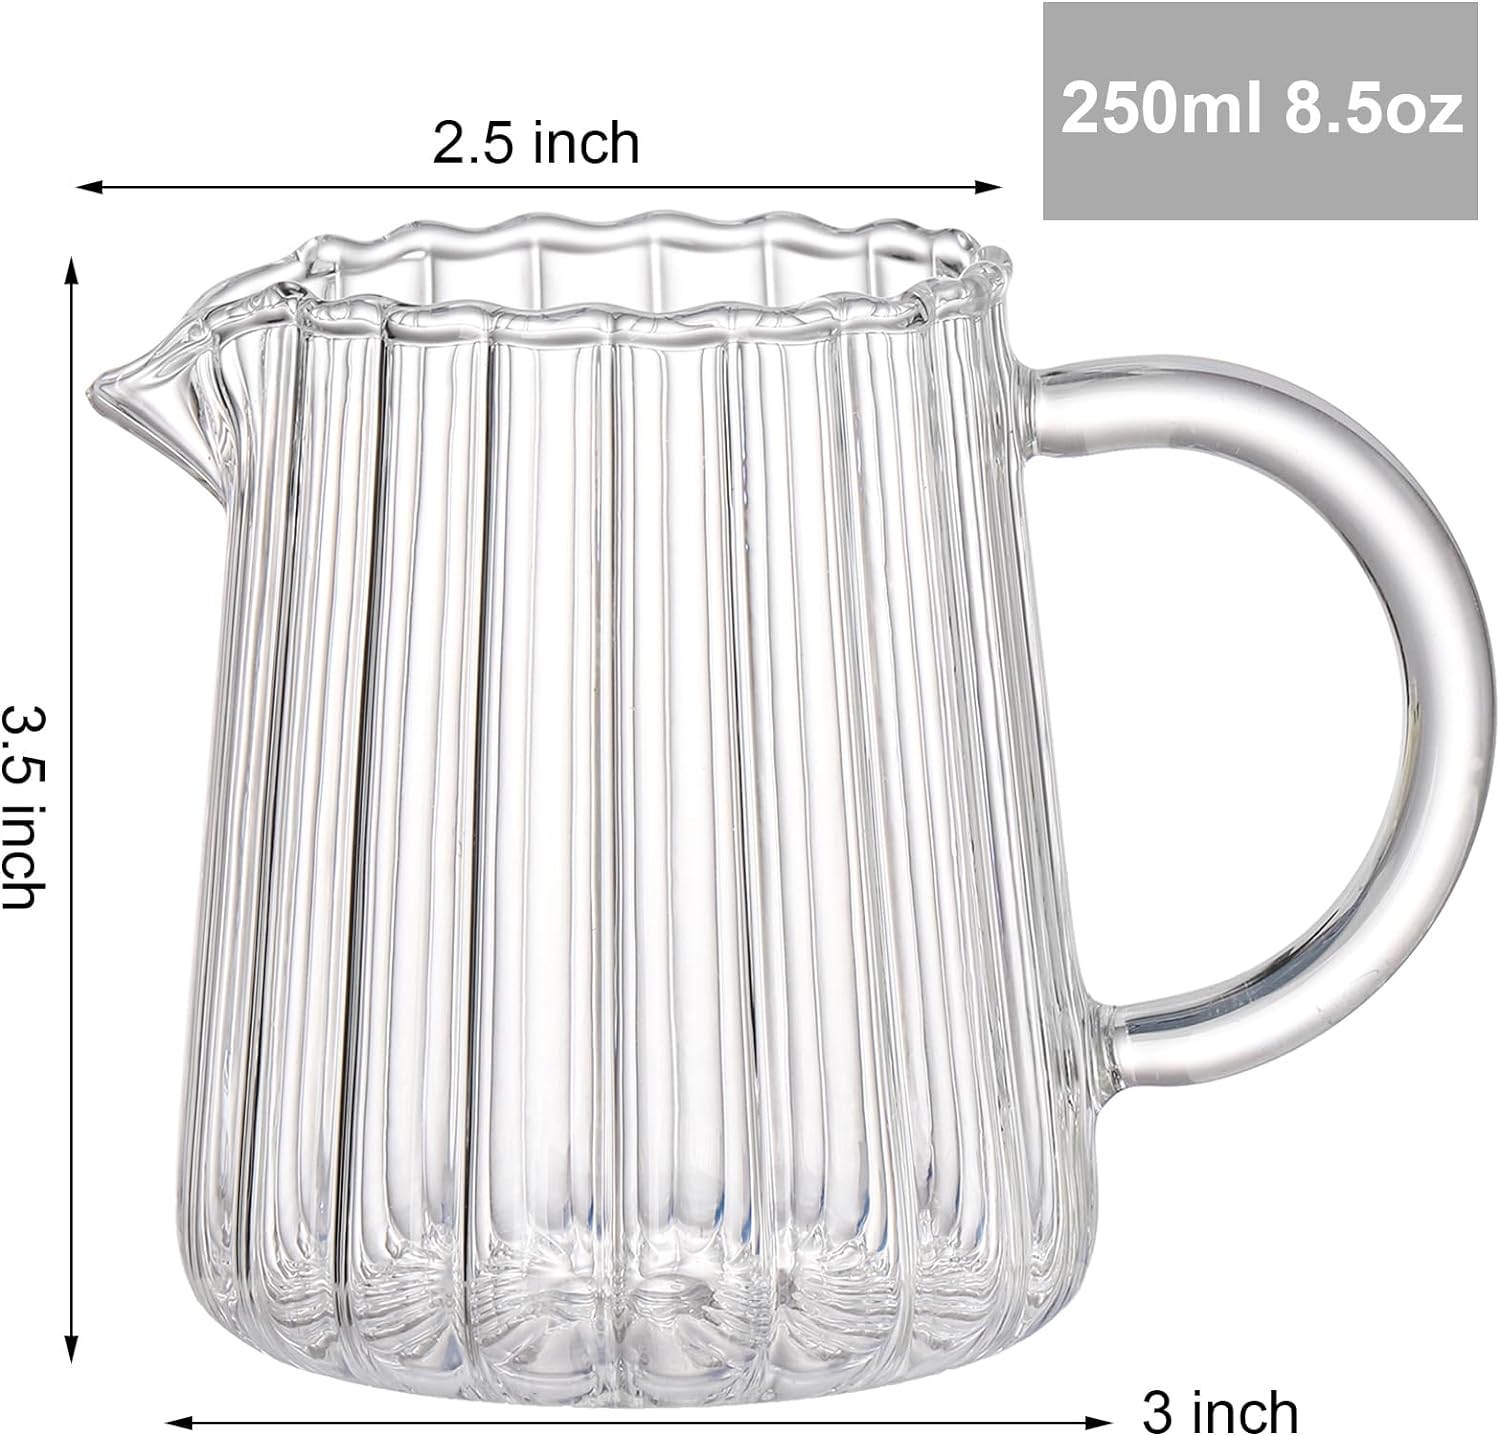 Yarlung 4 Pack Small Glass Pitcher, 8.5 Oz Crystal Clear Coffee Milk Creamer with Handle, Creative Tea Pitcher Fair Cups for Table Serving, Salad Sauce, Elegant Wave Shaped